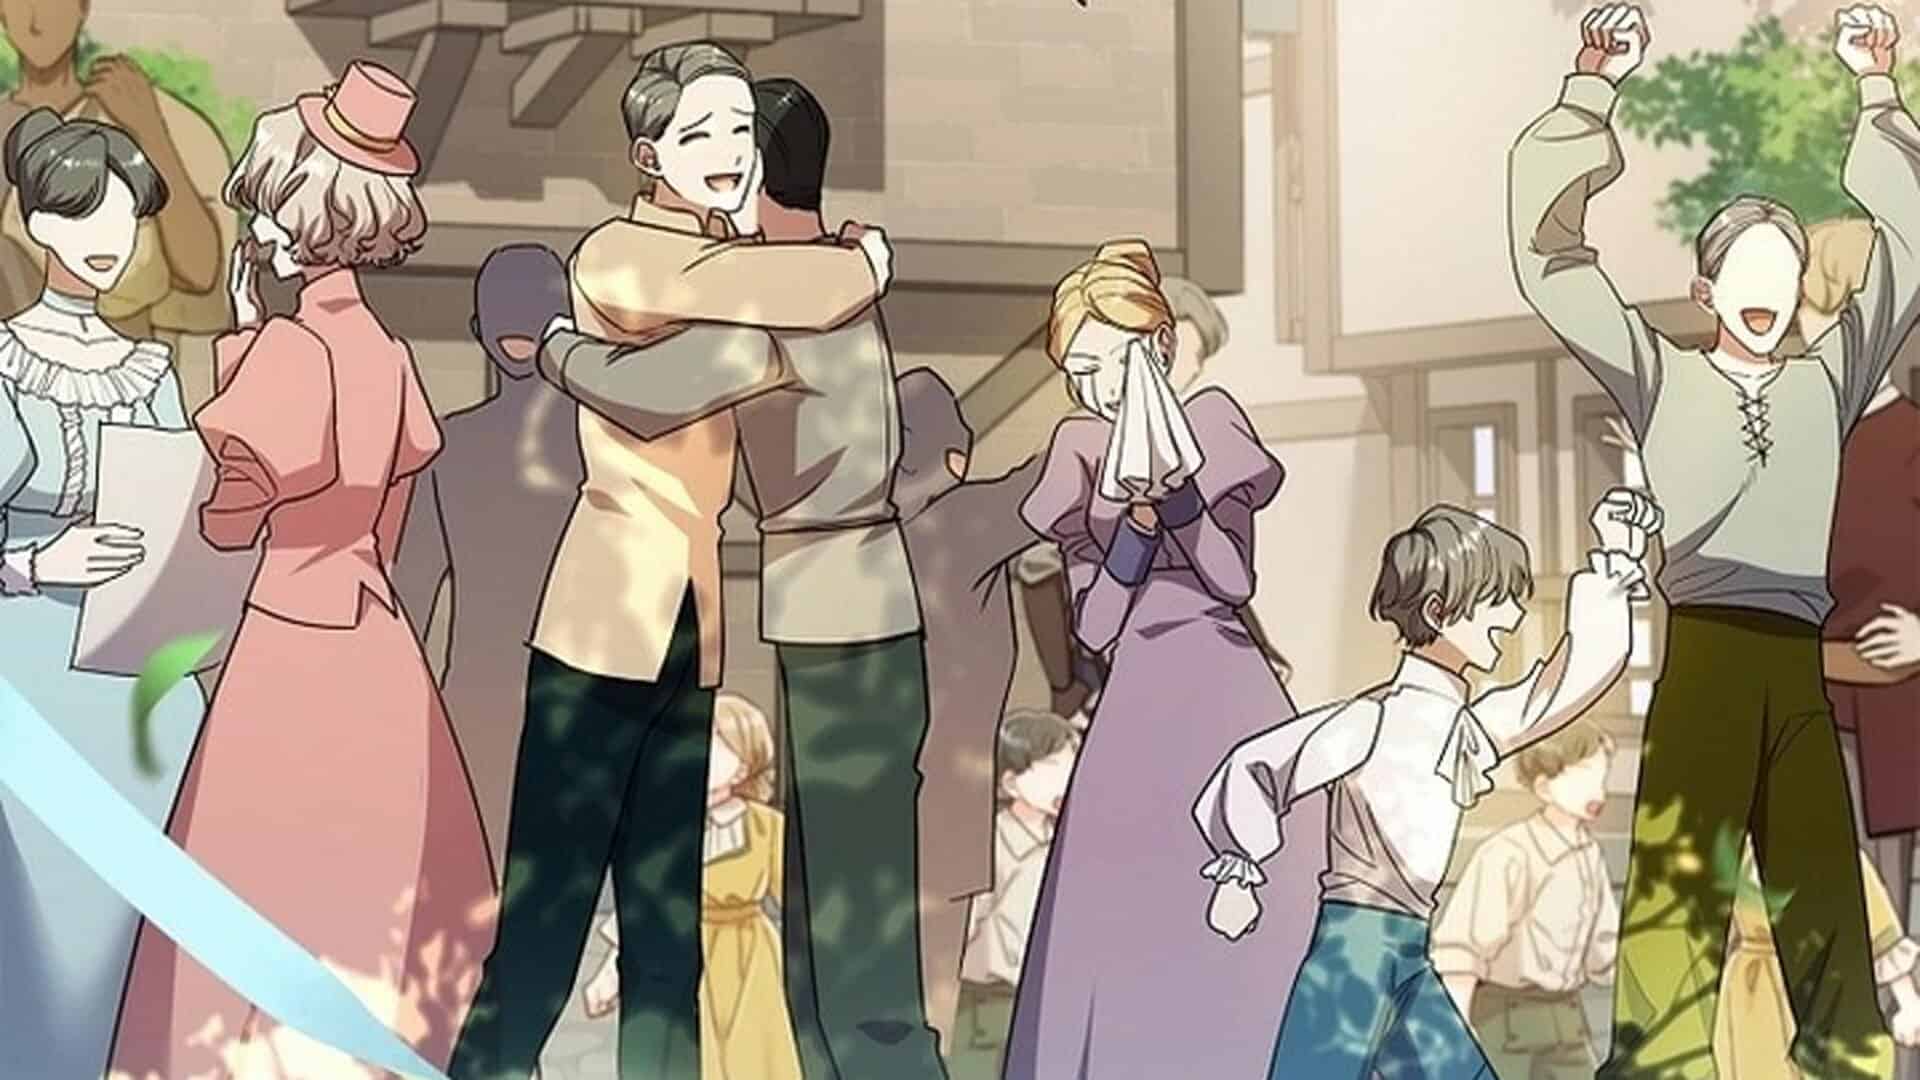 The Citizens Celebrating As The War If Finally Over In Their Empire's Favor - Male Lead, I’ll Respect Your Taste Chapter 37 (Credits: Kakao Page)